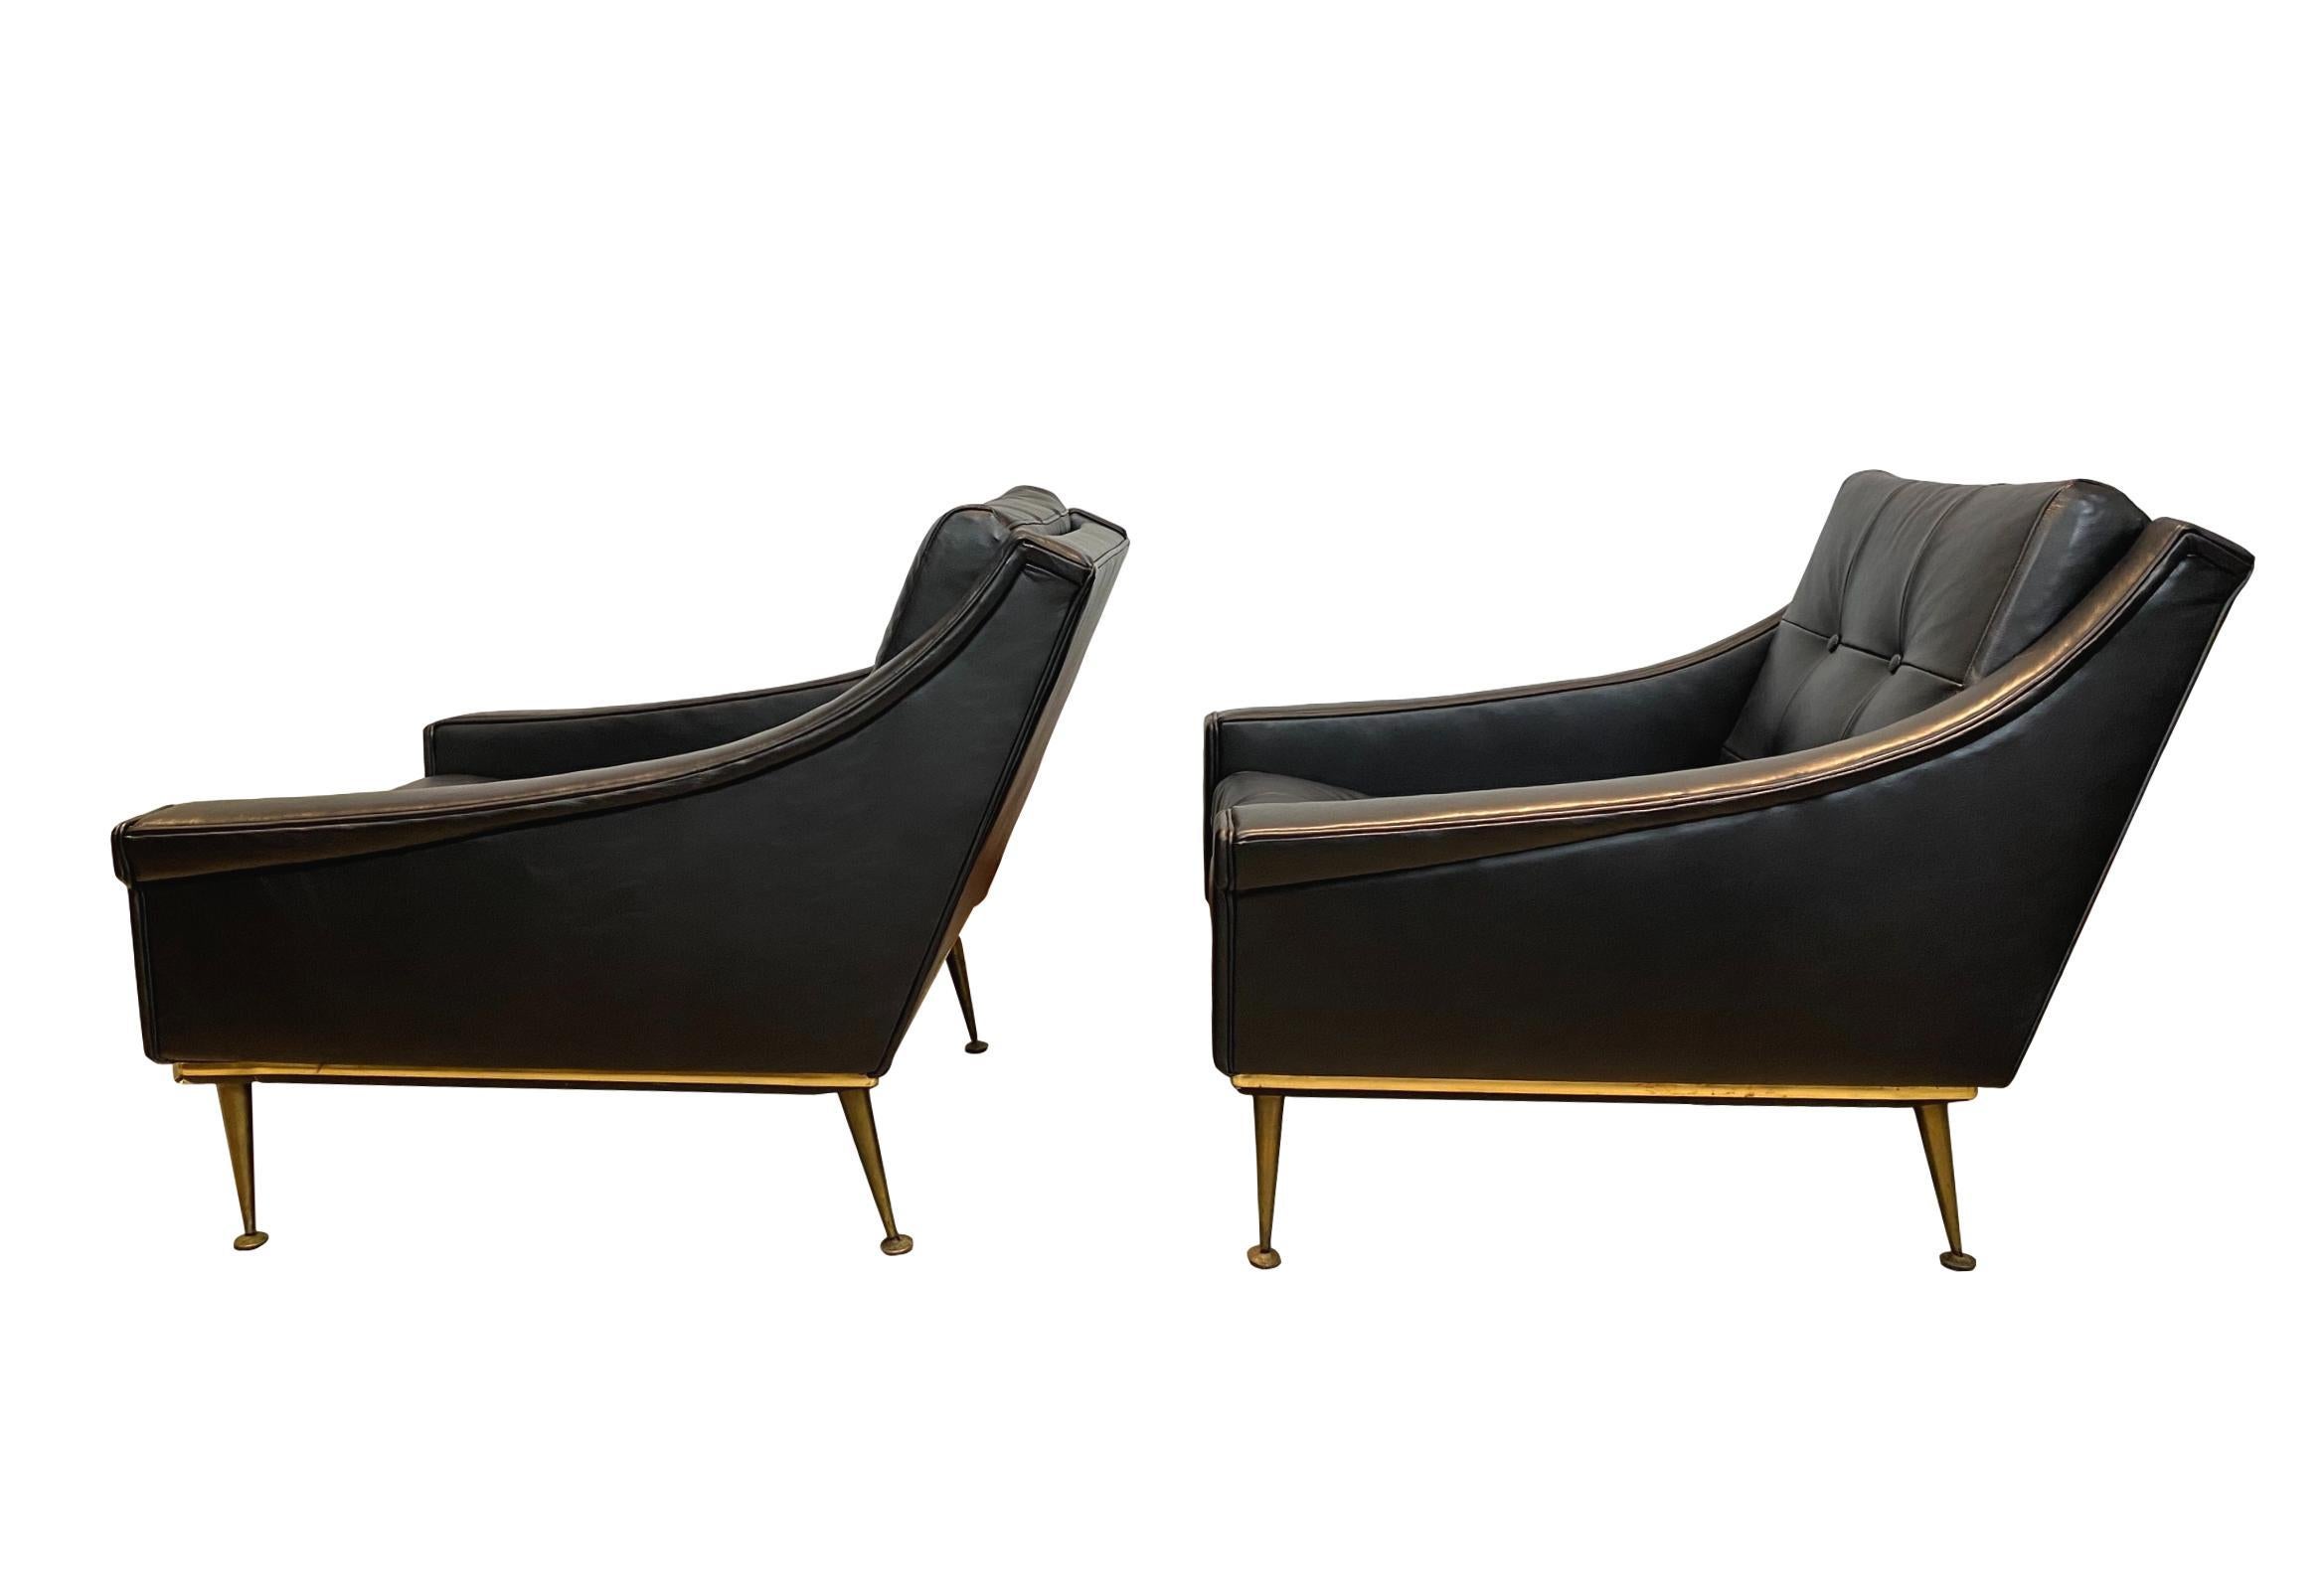 English Mid-Century Modern Lounge Chairs 1960 Newly Upholstered in Italian Leather, Pair